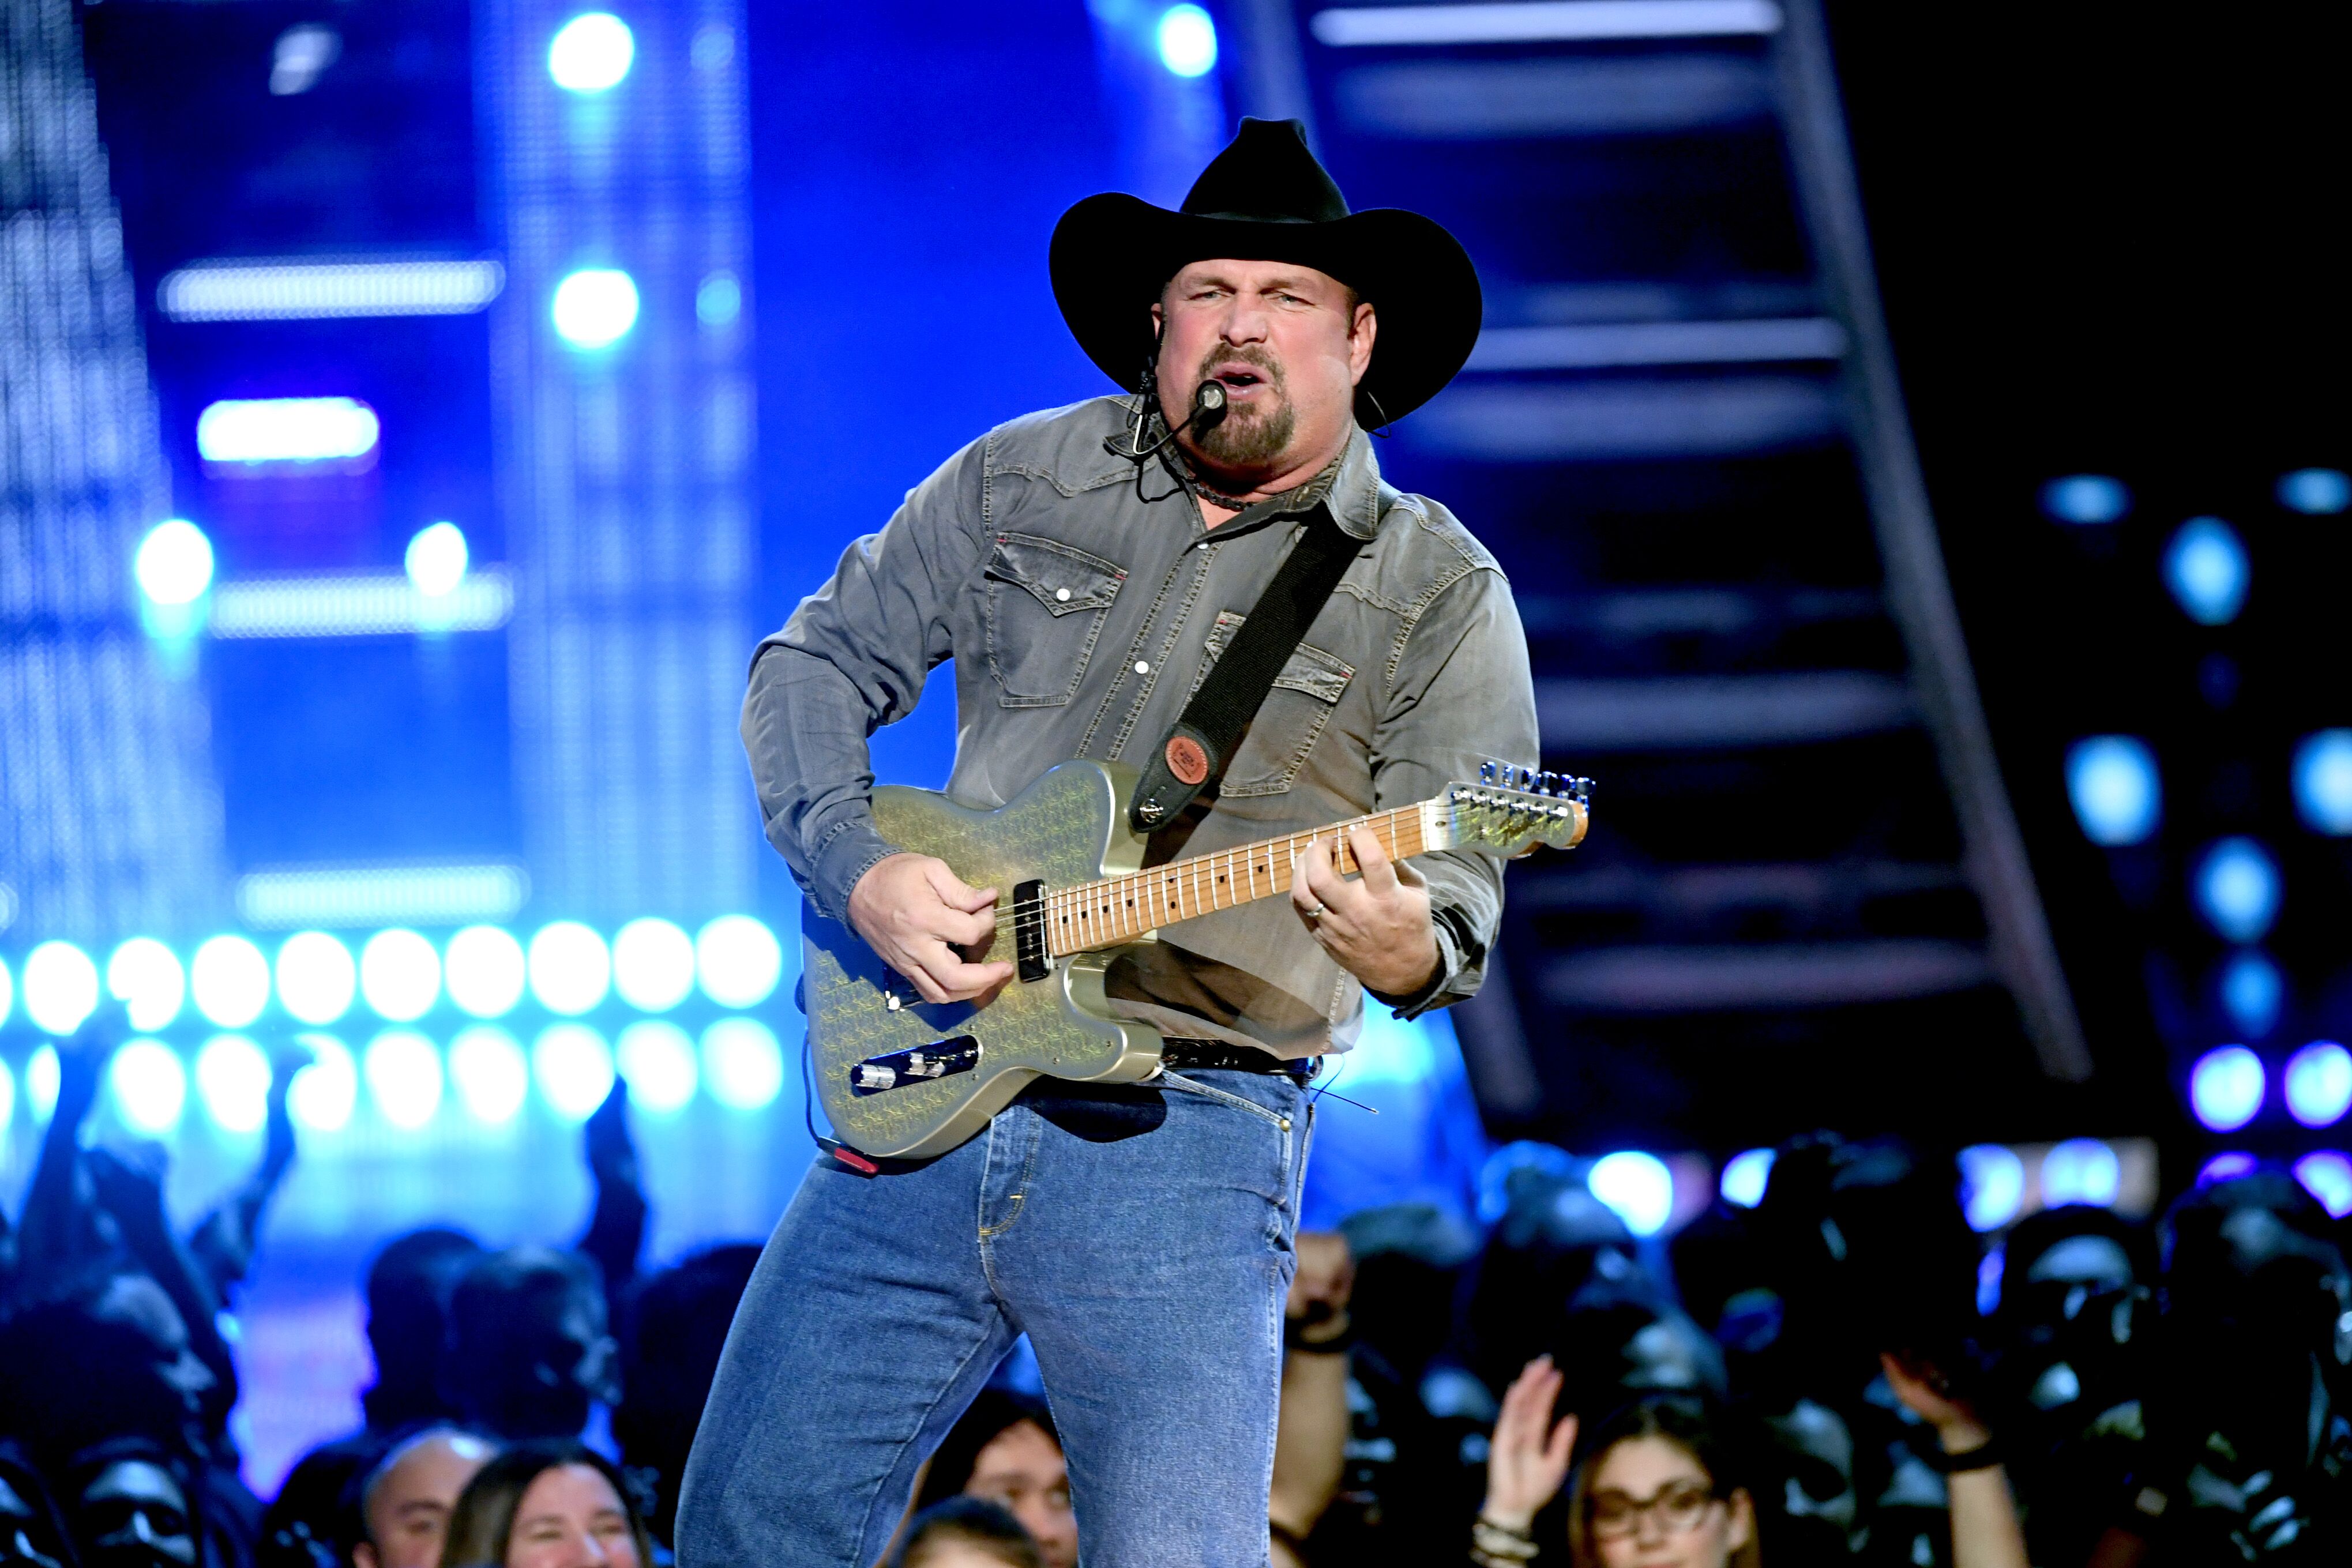 Garth Brooks performs on stage at the 2019 iHeartRadio Music Awards. | Source: Getty Images